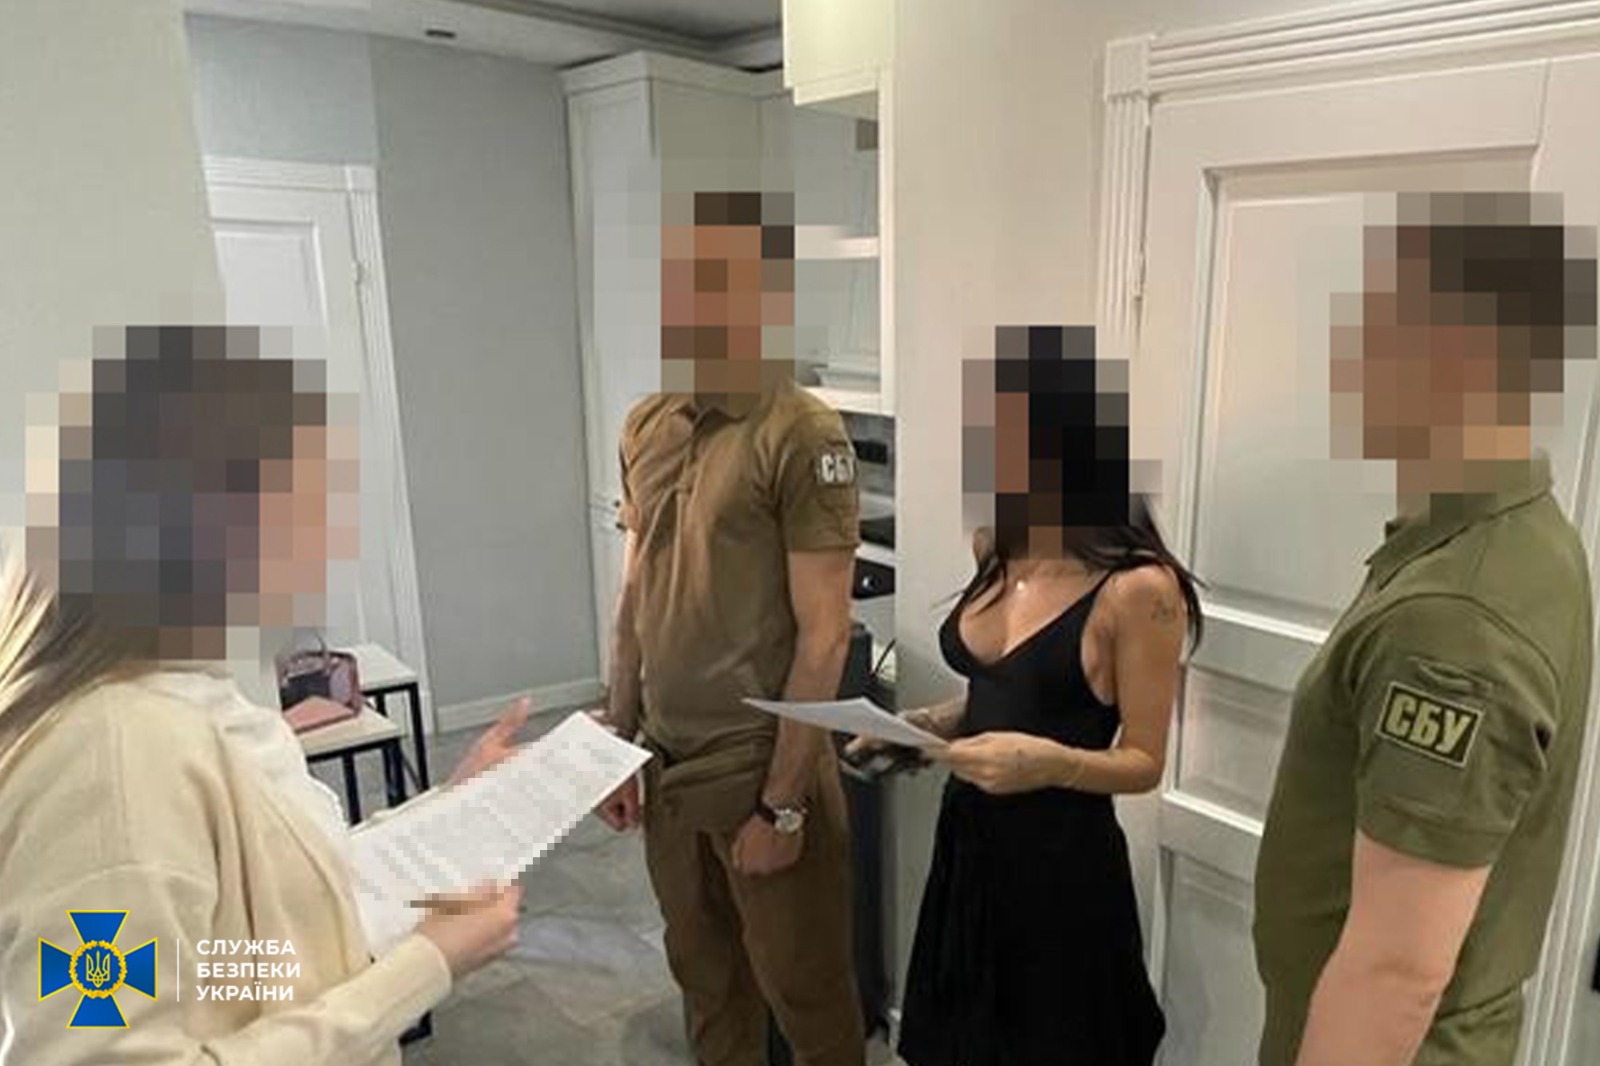 SBU gathers proof confirming illegal activities of 4 residents of Kyiv (Image Courtesy: Facebook)